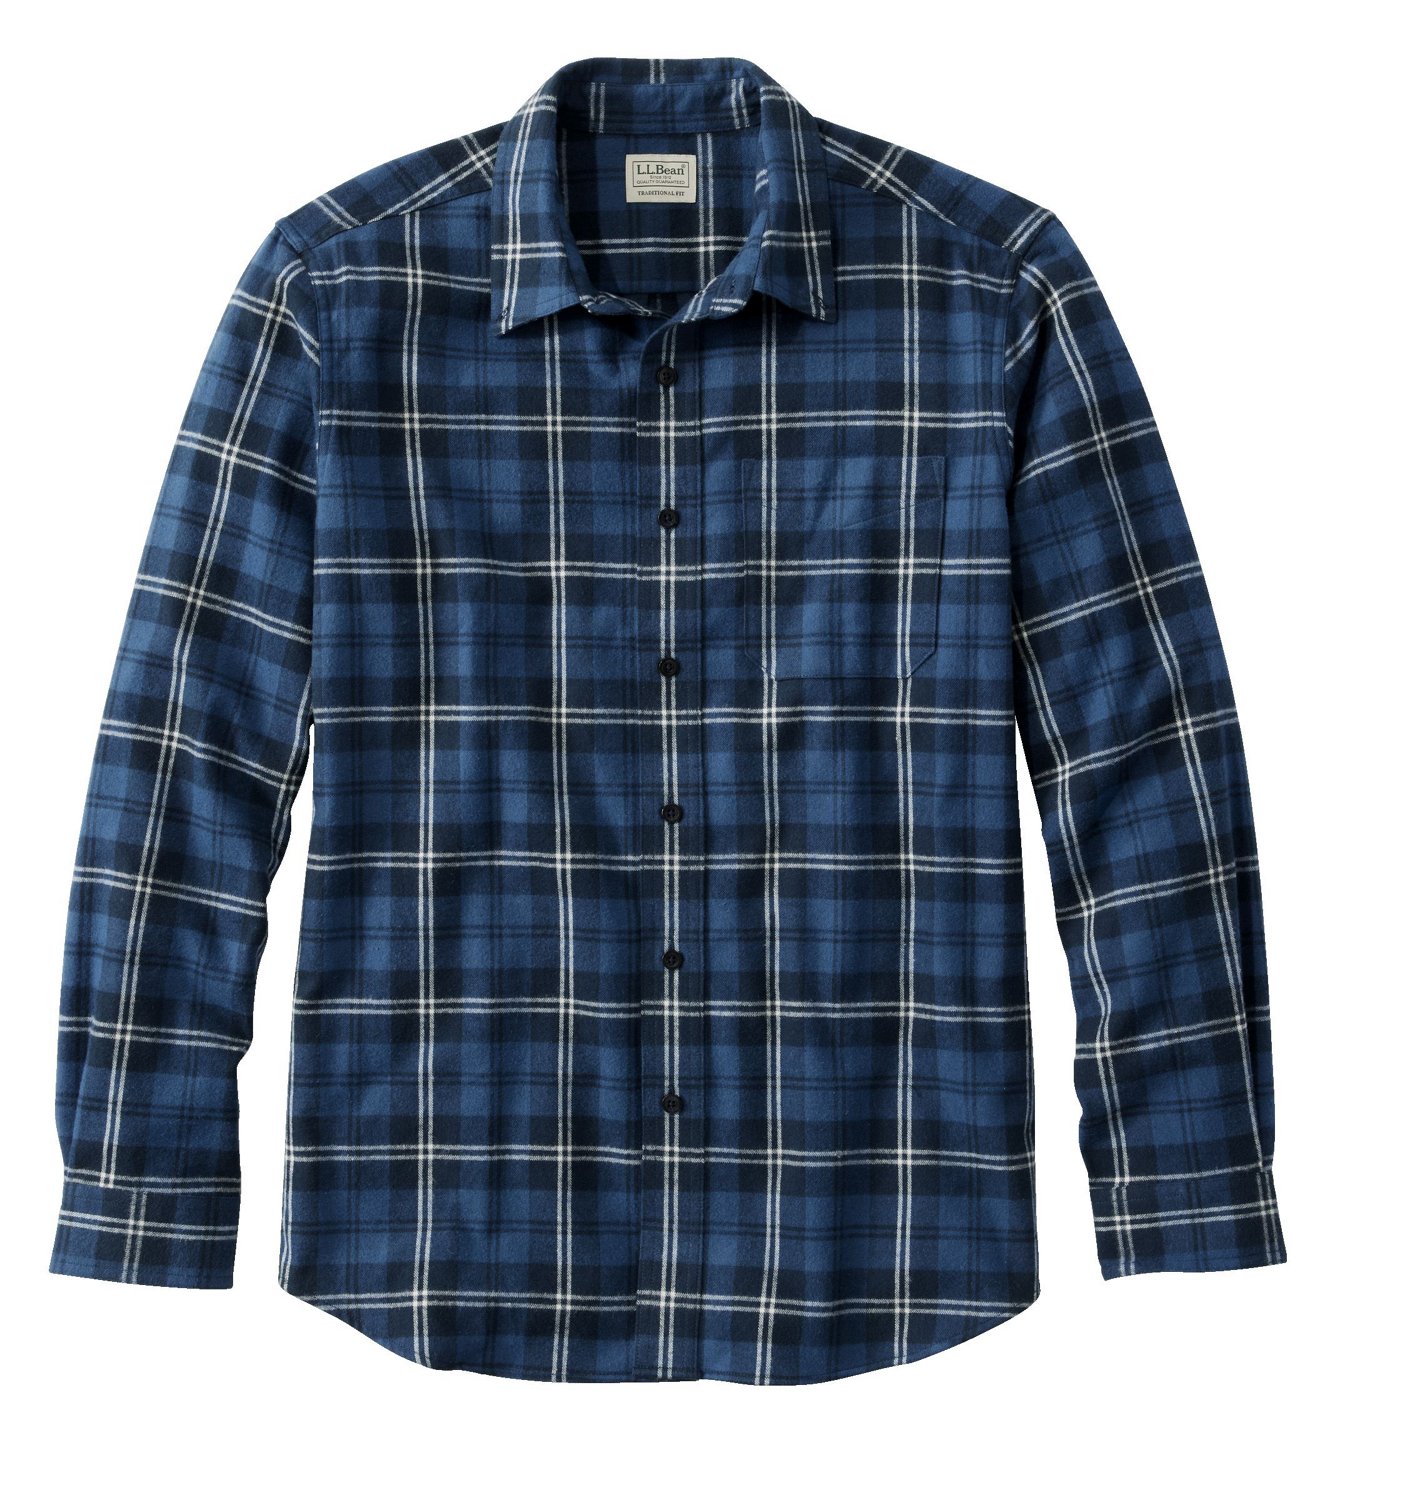 https://academy.scene7.com/is/image/academy//shirts/llbean-mens-scotch-plaid-traditional-fit-flannel-shirt-228061-32140-blue/og-image/0caad4b78a91470a9eb9320d5c55c57c